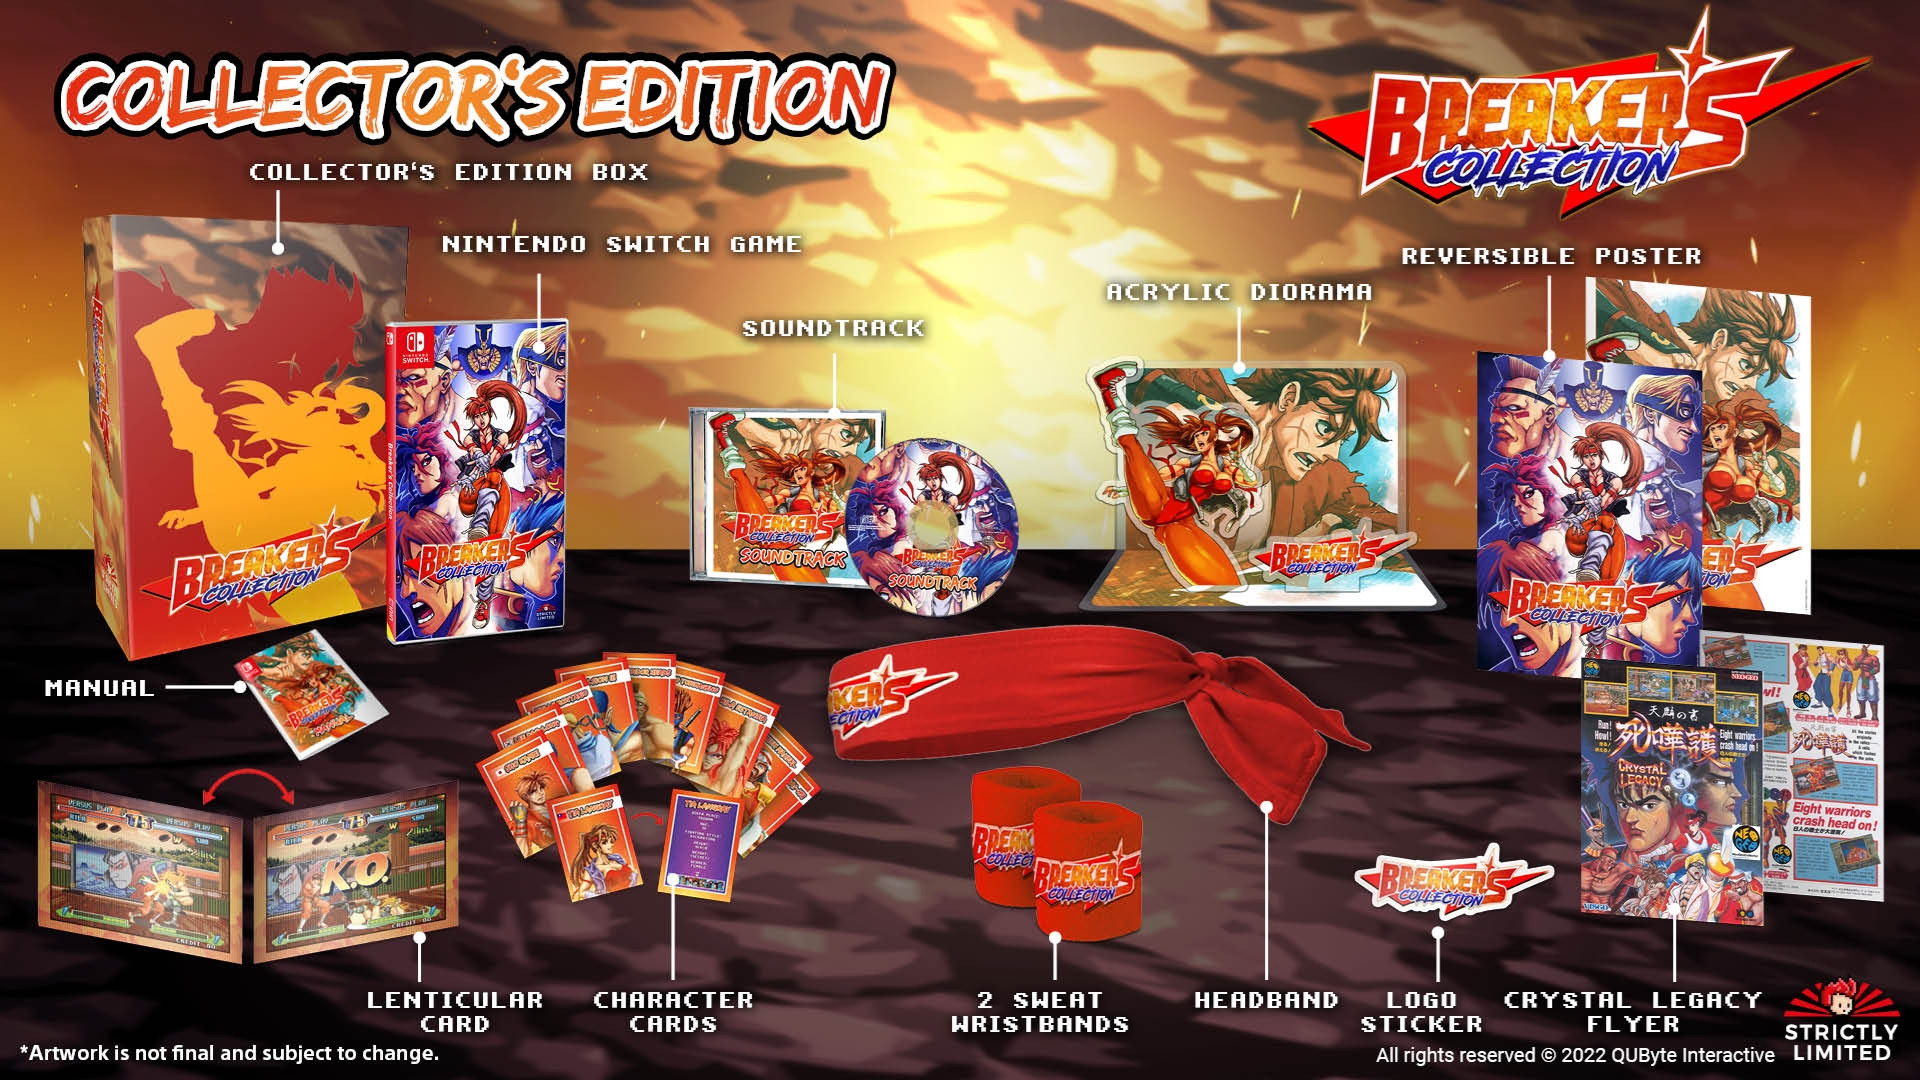 Breaker's Collection Collector's Edition - Nintendo Switch